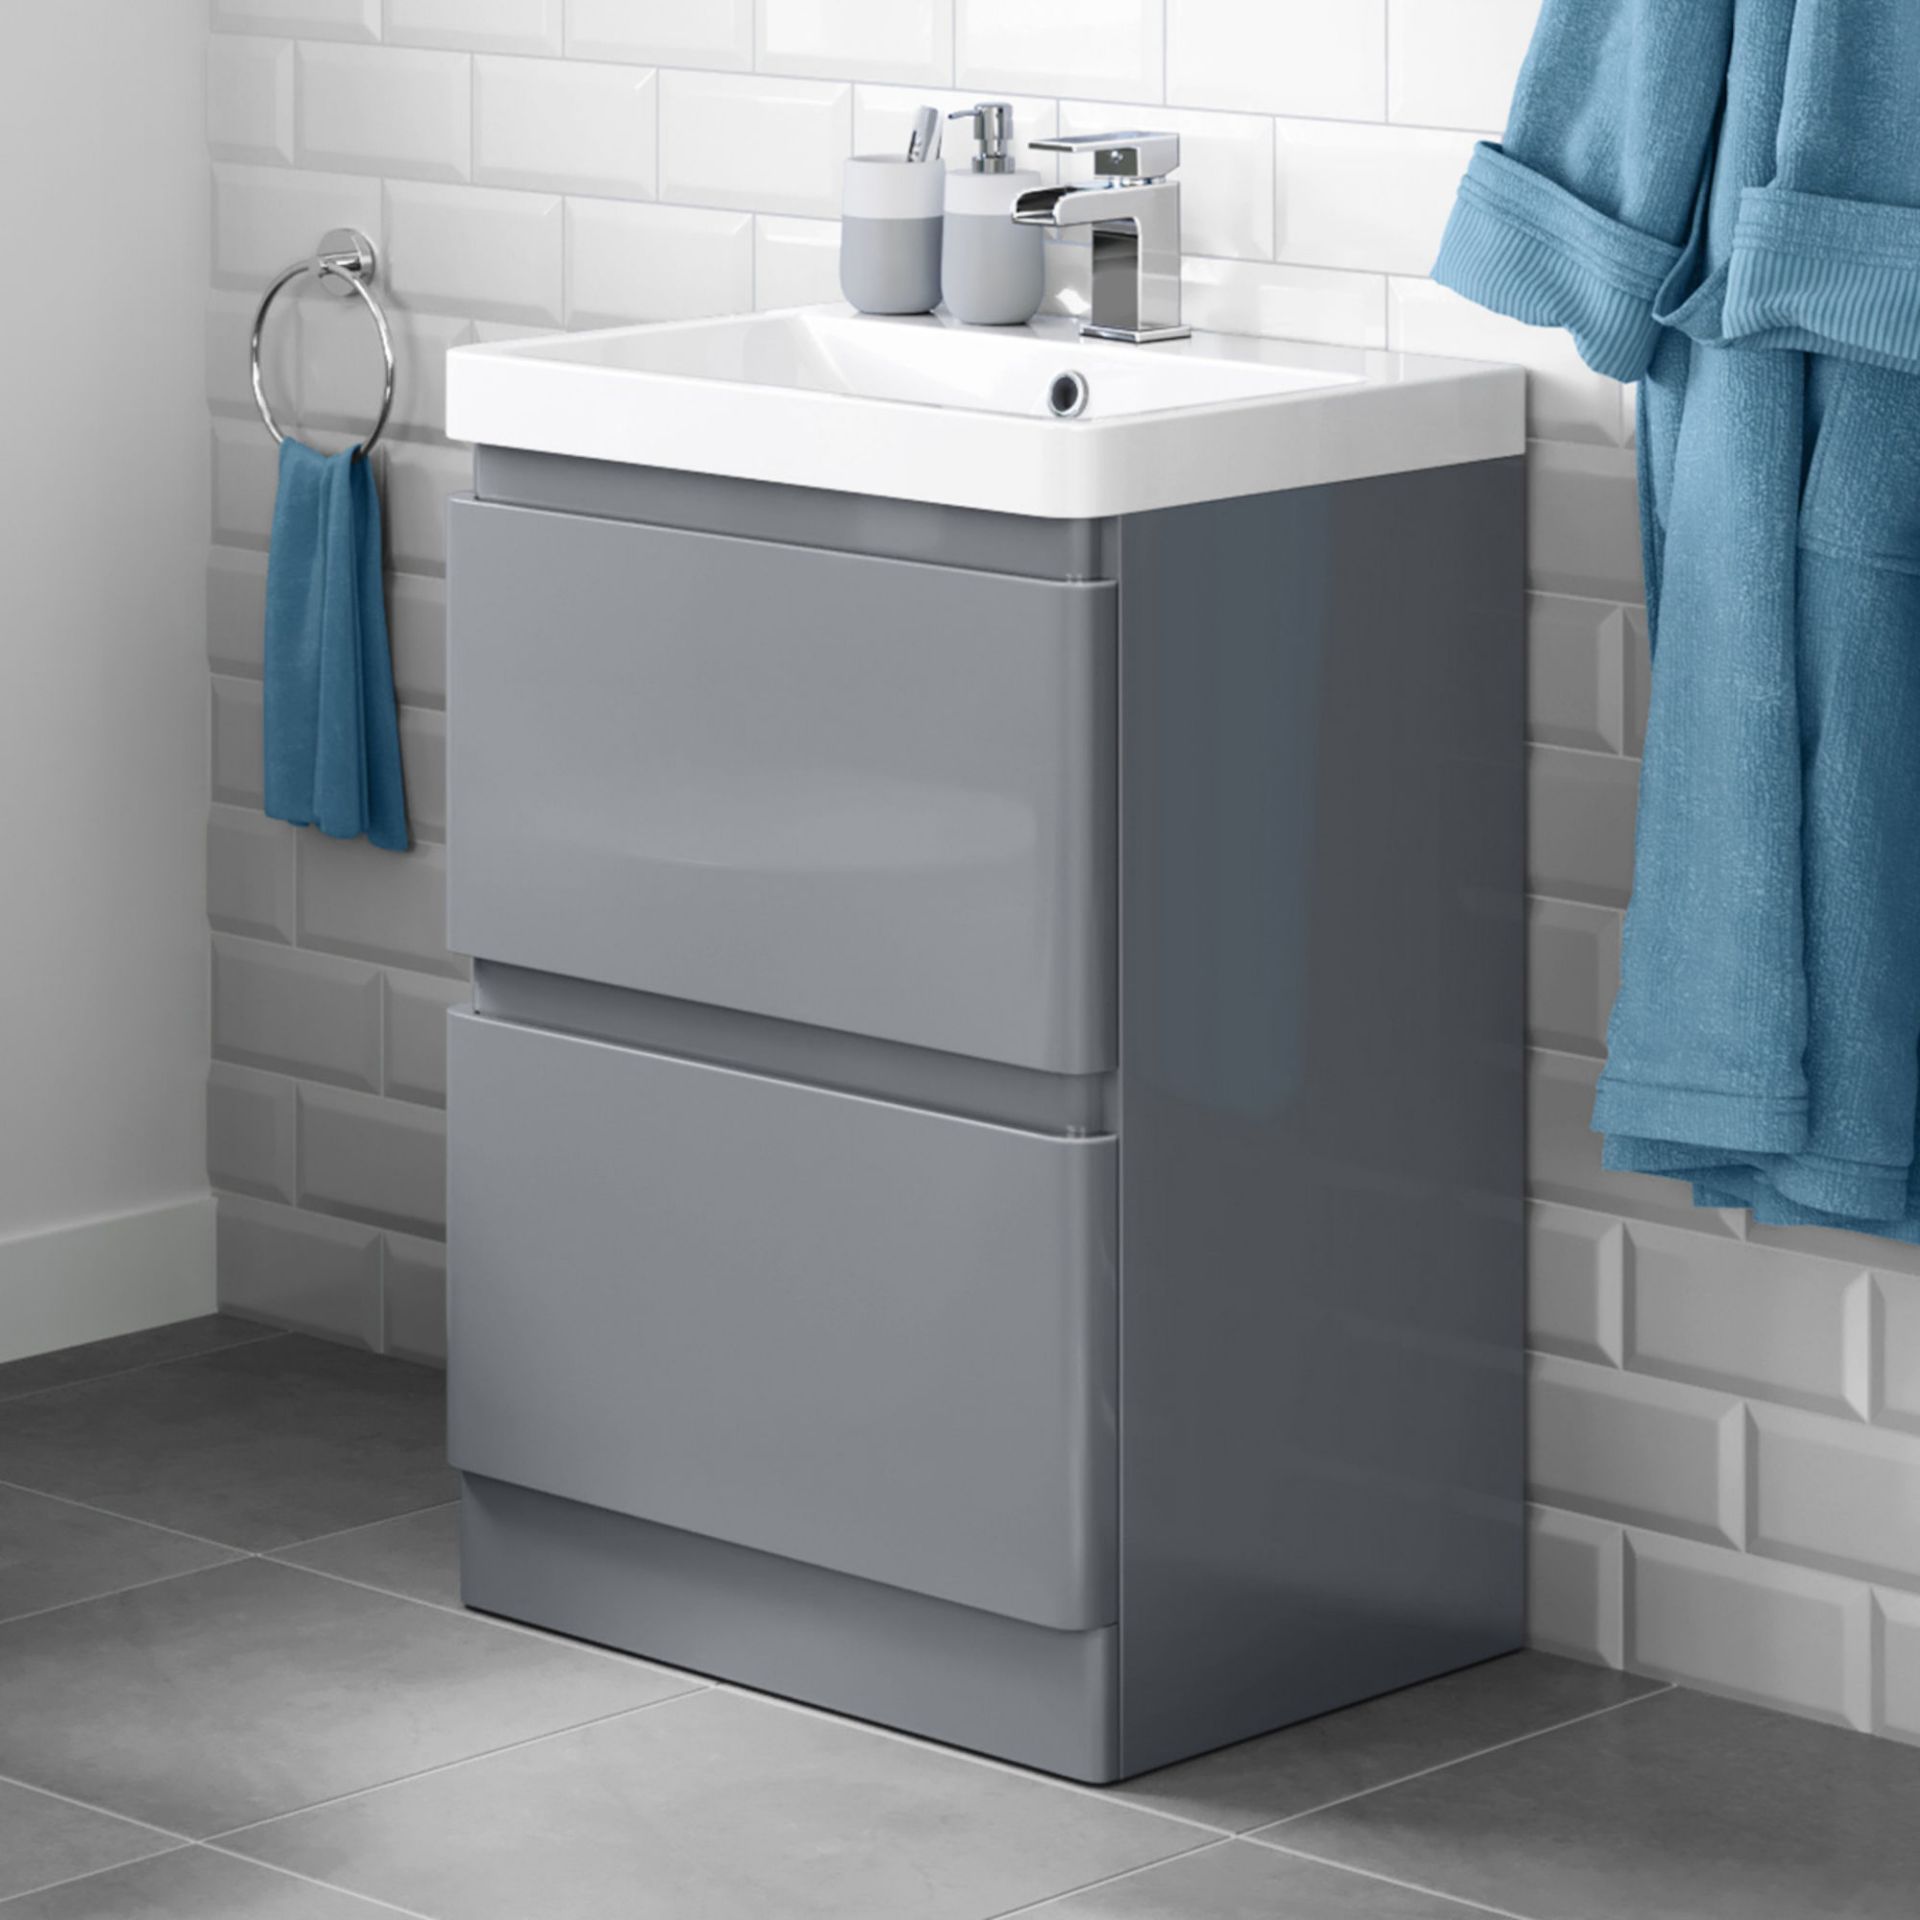 (KL301) 600mm Denver Gloss Grey Drawer Unit - Floor Standing. . Does NOT include basin. We love this